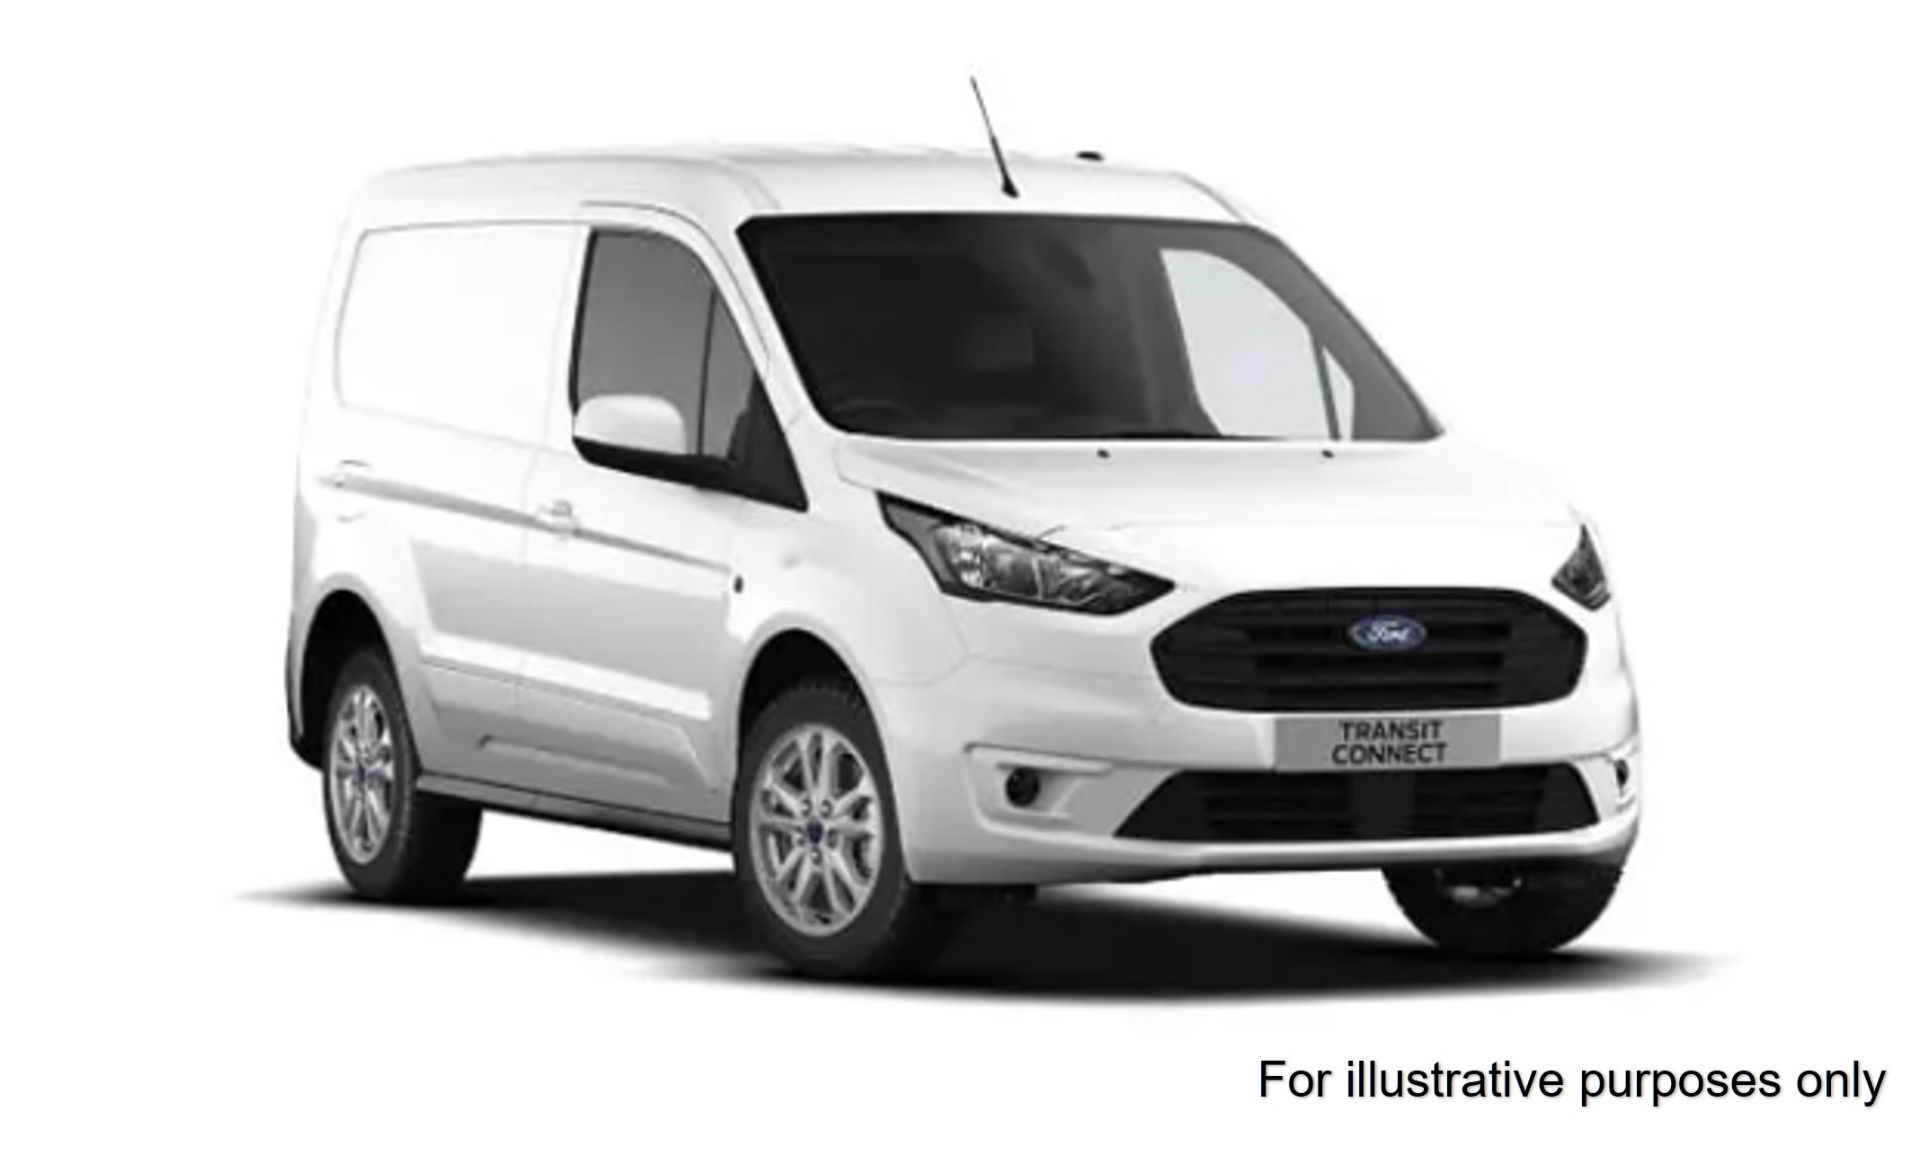 2018 Ford Transit Connect 200 L1 DIESEL 1.5 TDCi 75PS VAN EURO 6 (FG18XZX) Image 1